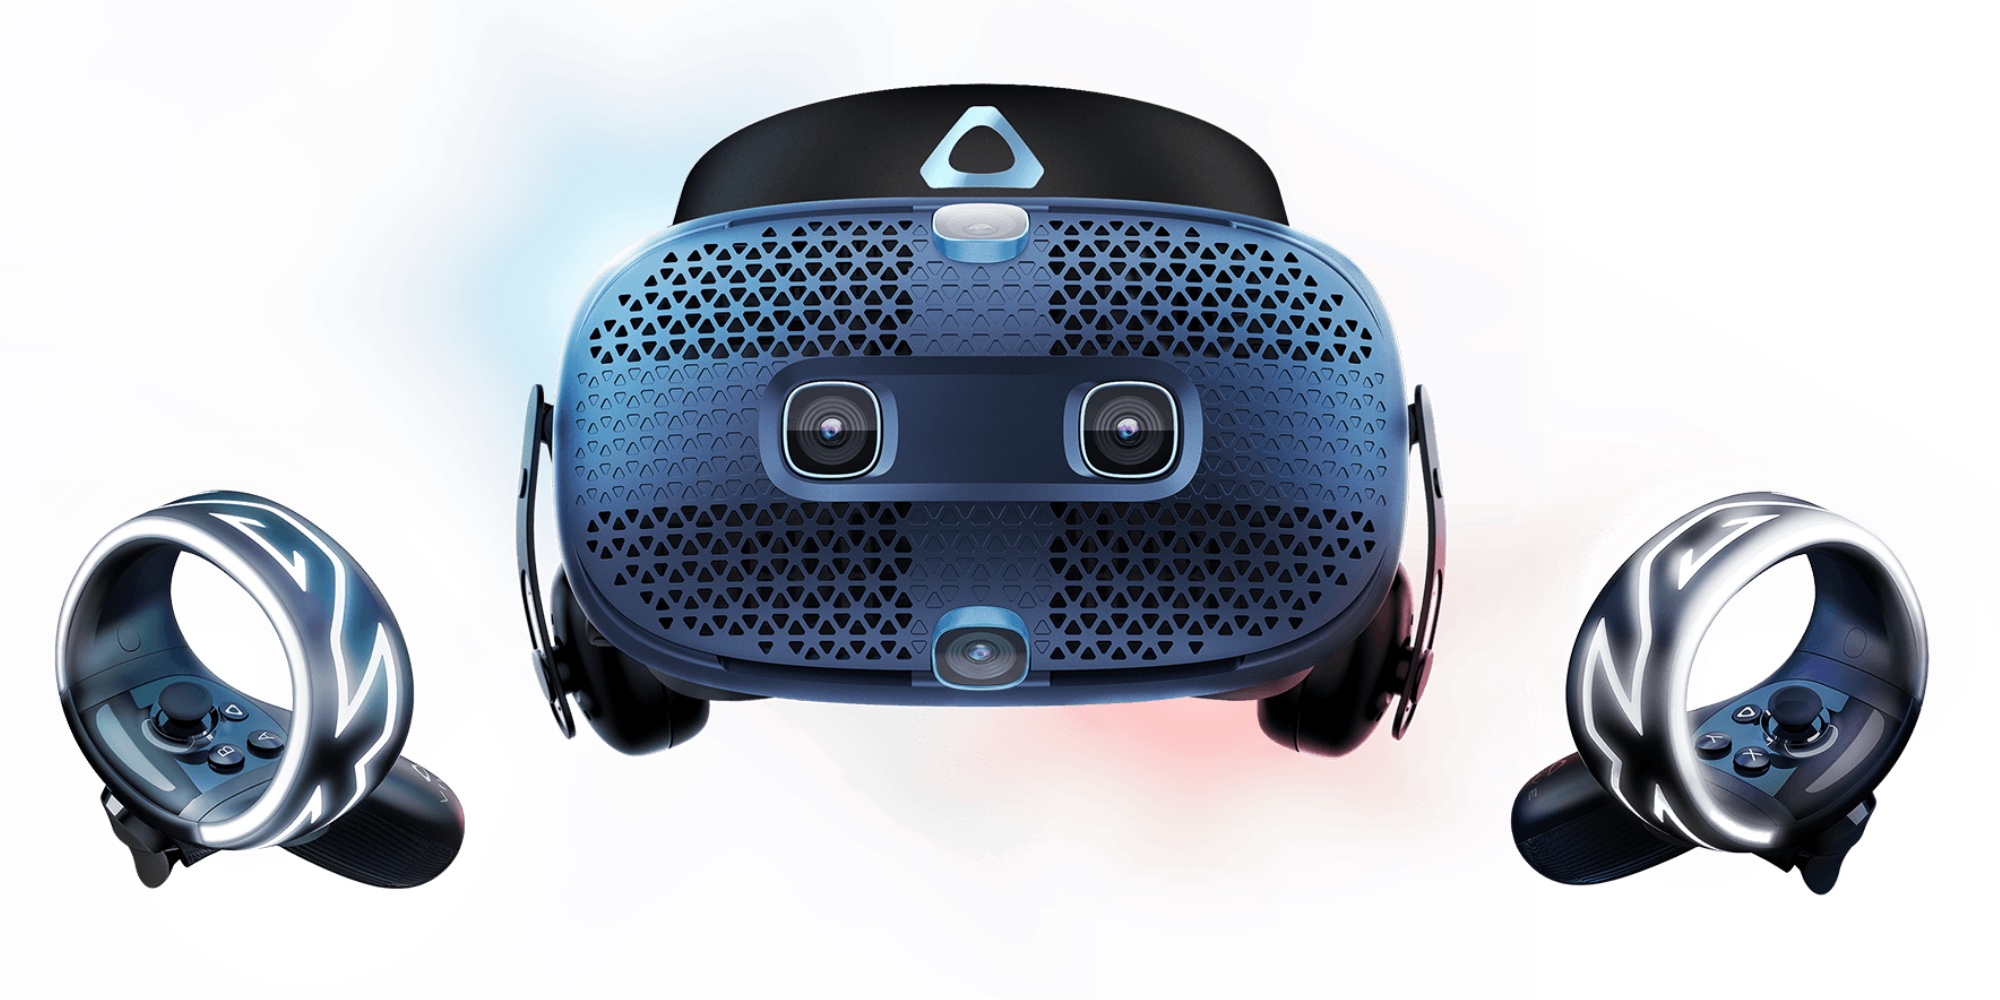 Is htc vive compatible with mac